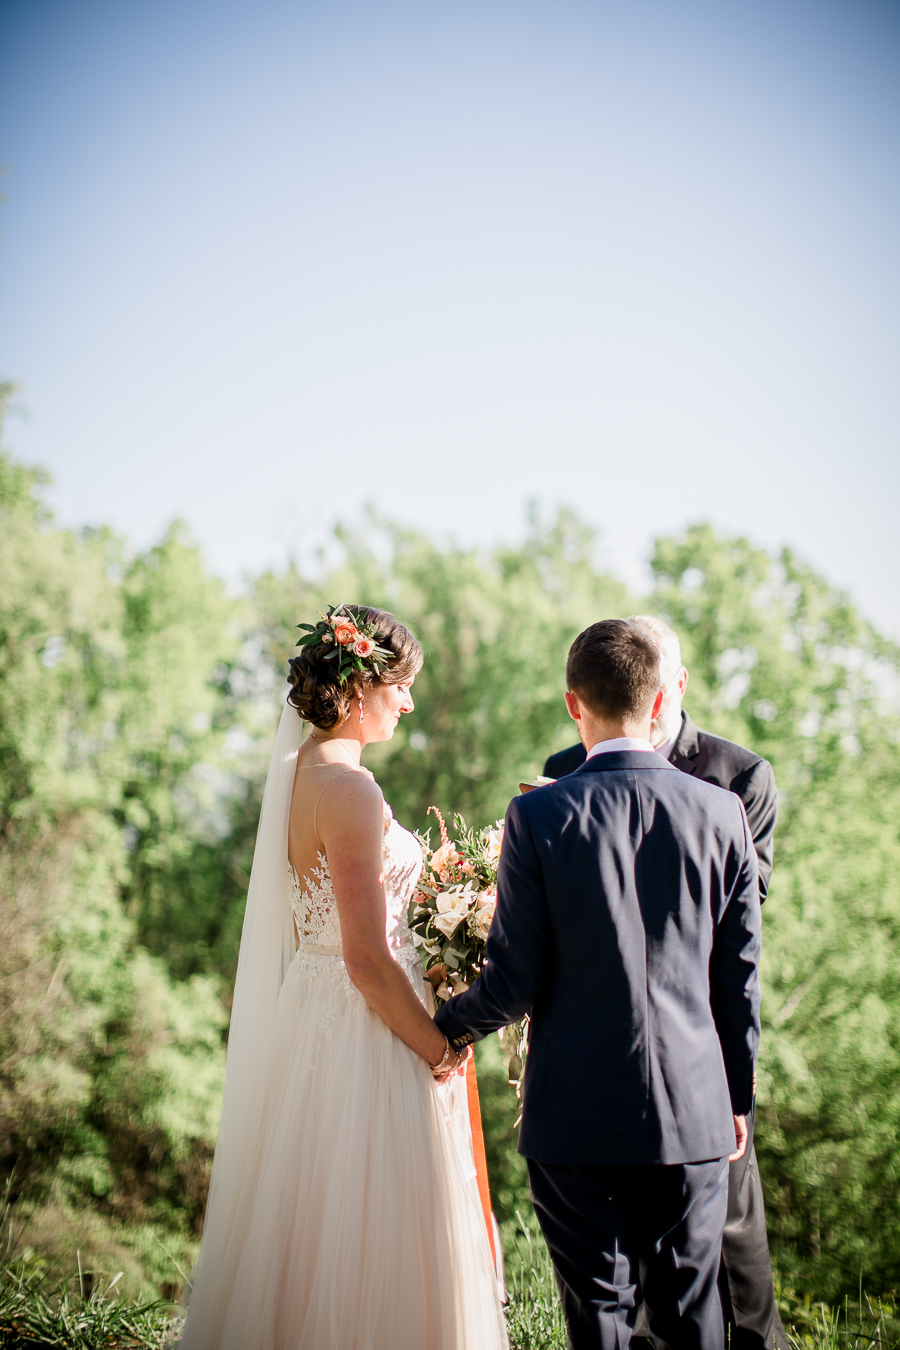 Holding hands at the ceremony at this North Carolina Elopement by Knoxville Wedding Photographer, Amanda May Photos.